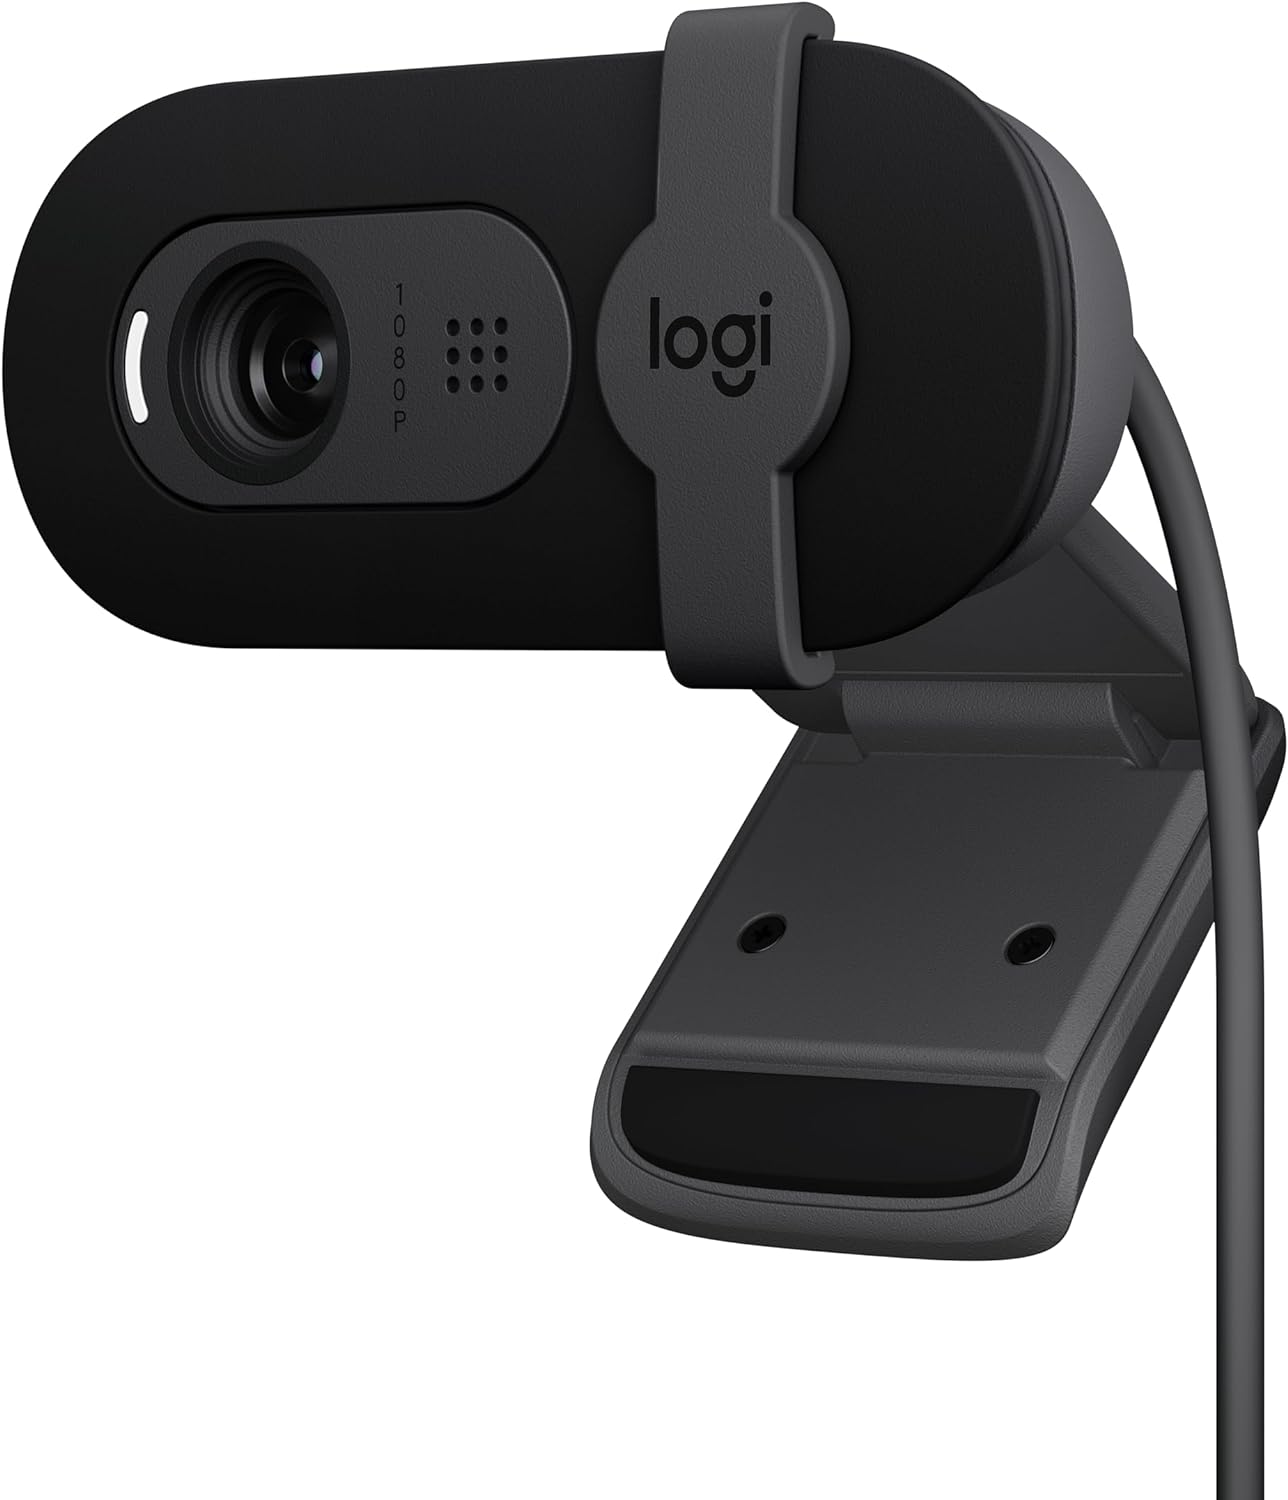 Logitech Brio 101 Full HD 1080p Webcam Made for Meetings and Works for Streaming  Auto-Light Balance, Built-in Mic, Privacy Shutter, USB-A, for Microsoft Teams, Google Meet, Zoom, and More - Black